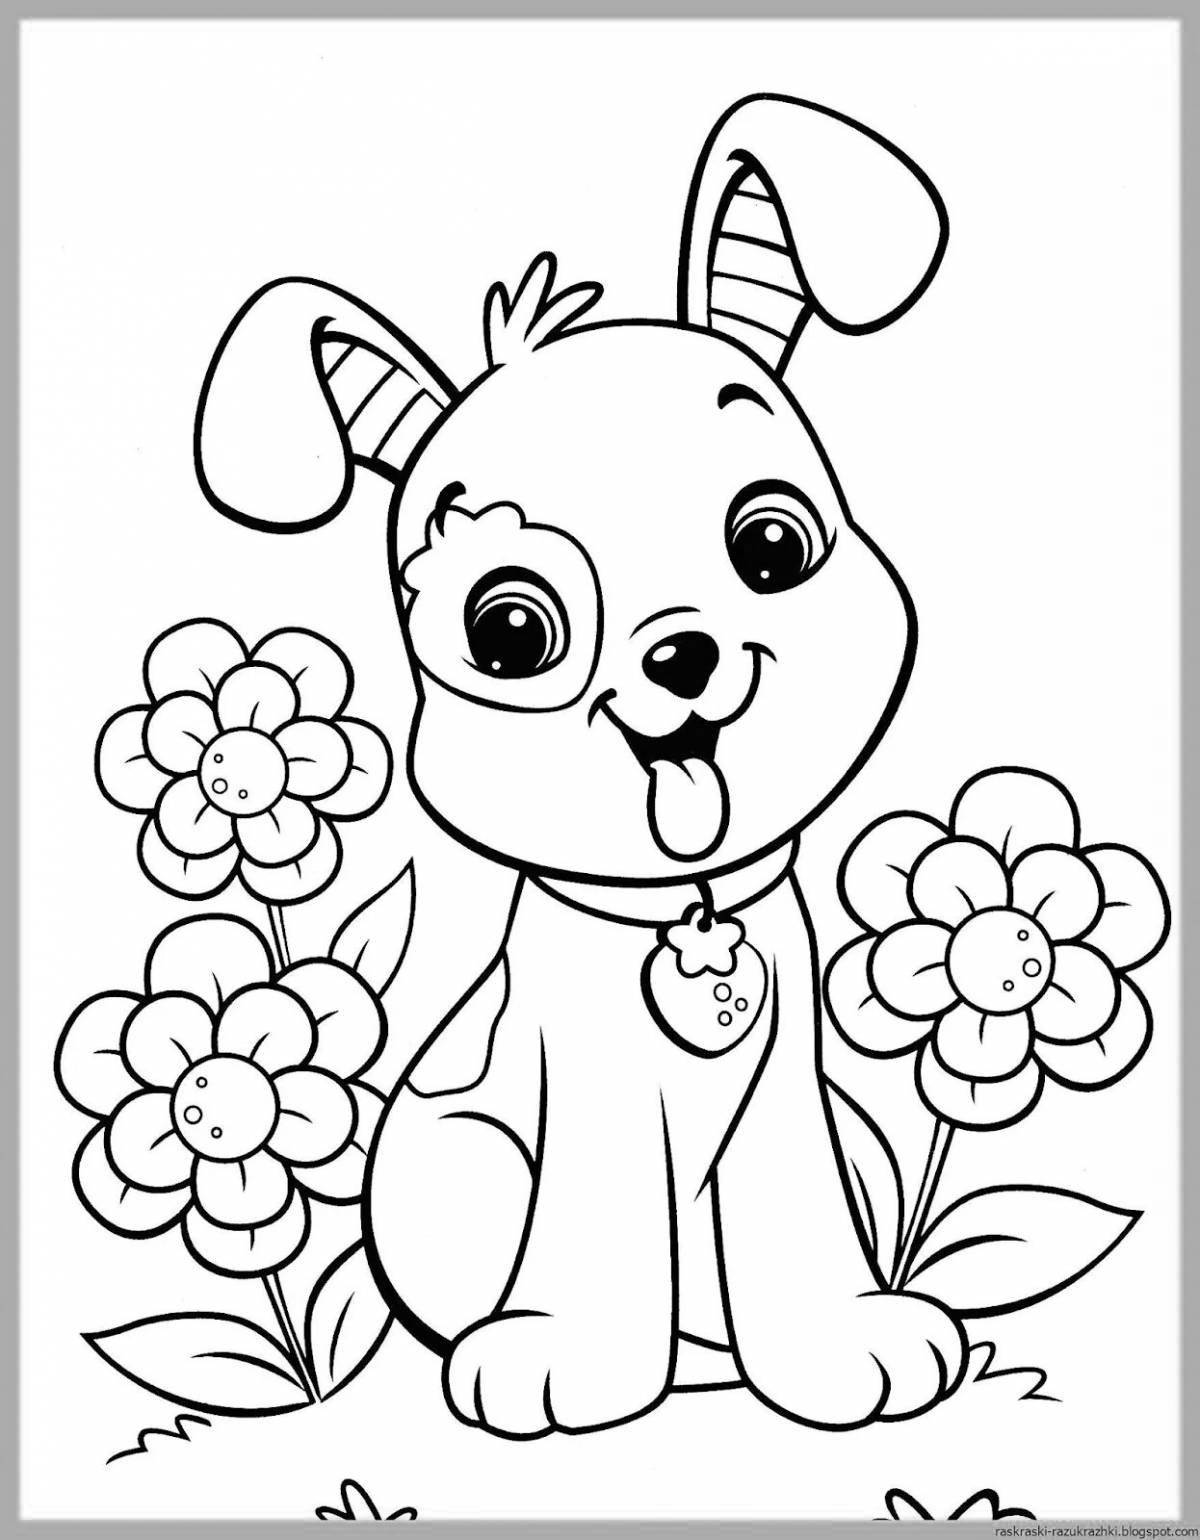 Fantastic coloring book for girls with 9 year old animals